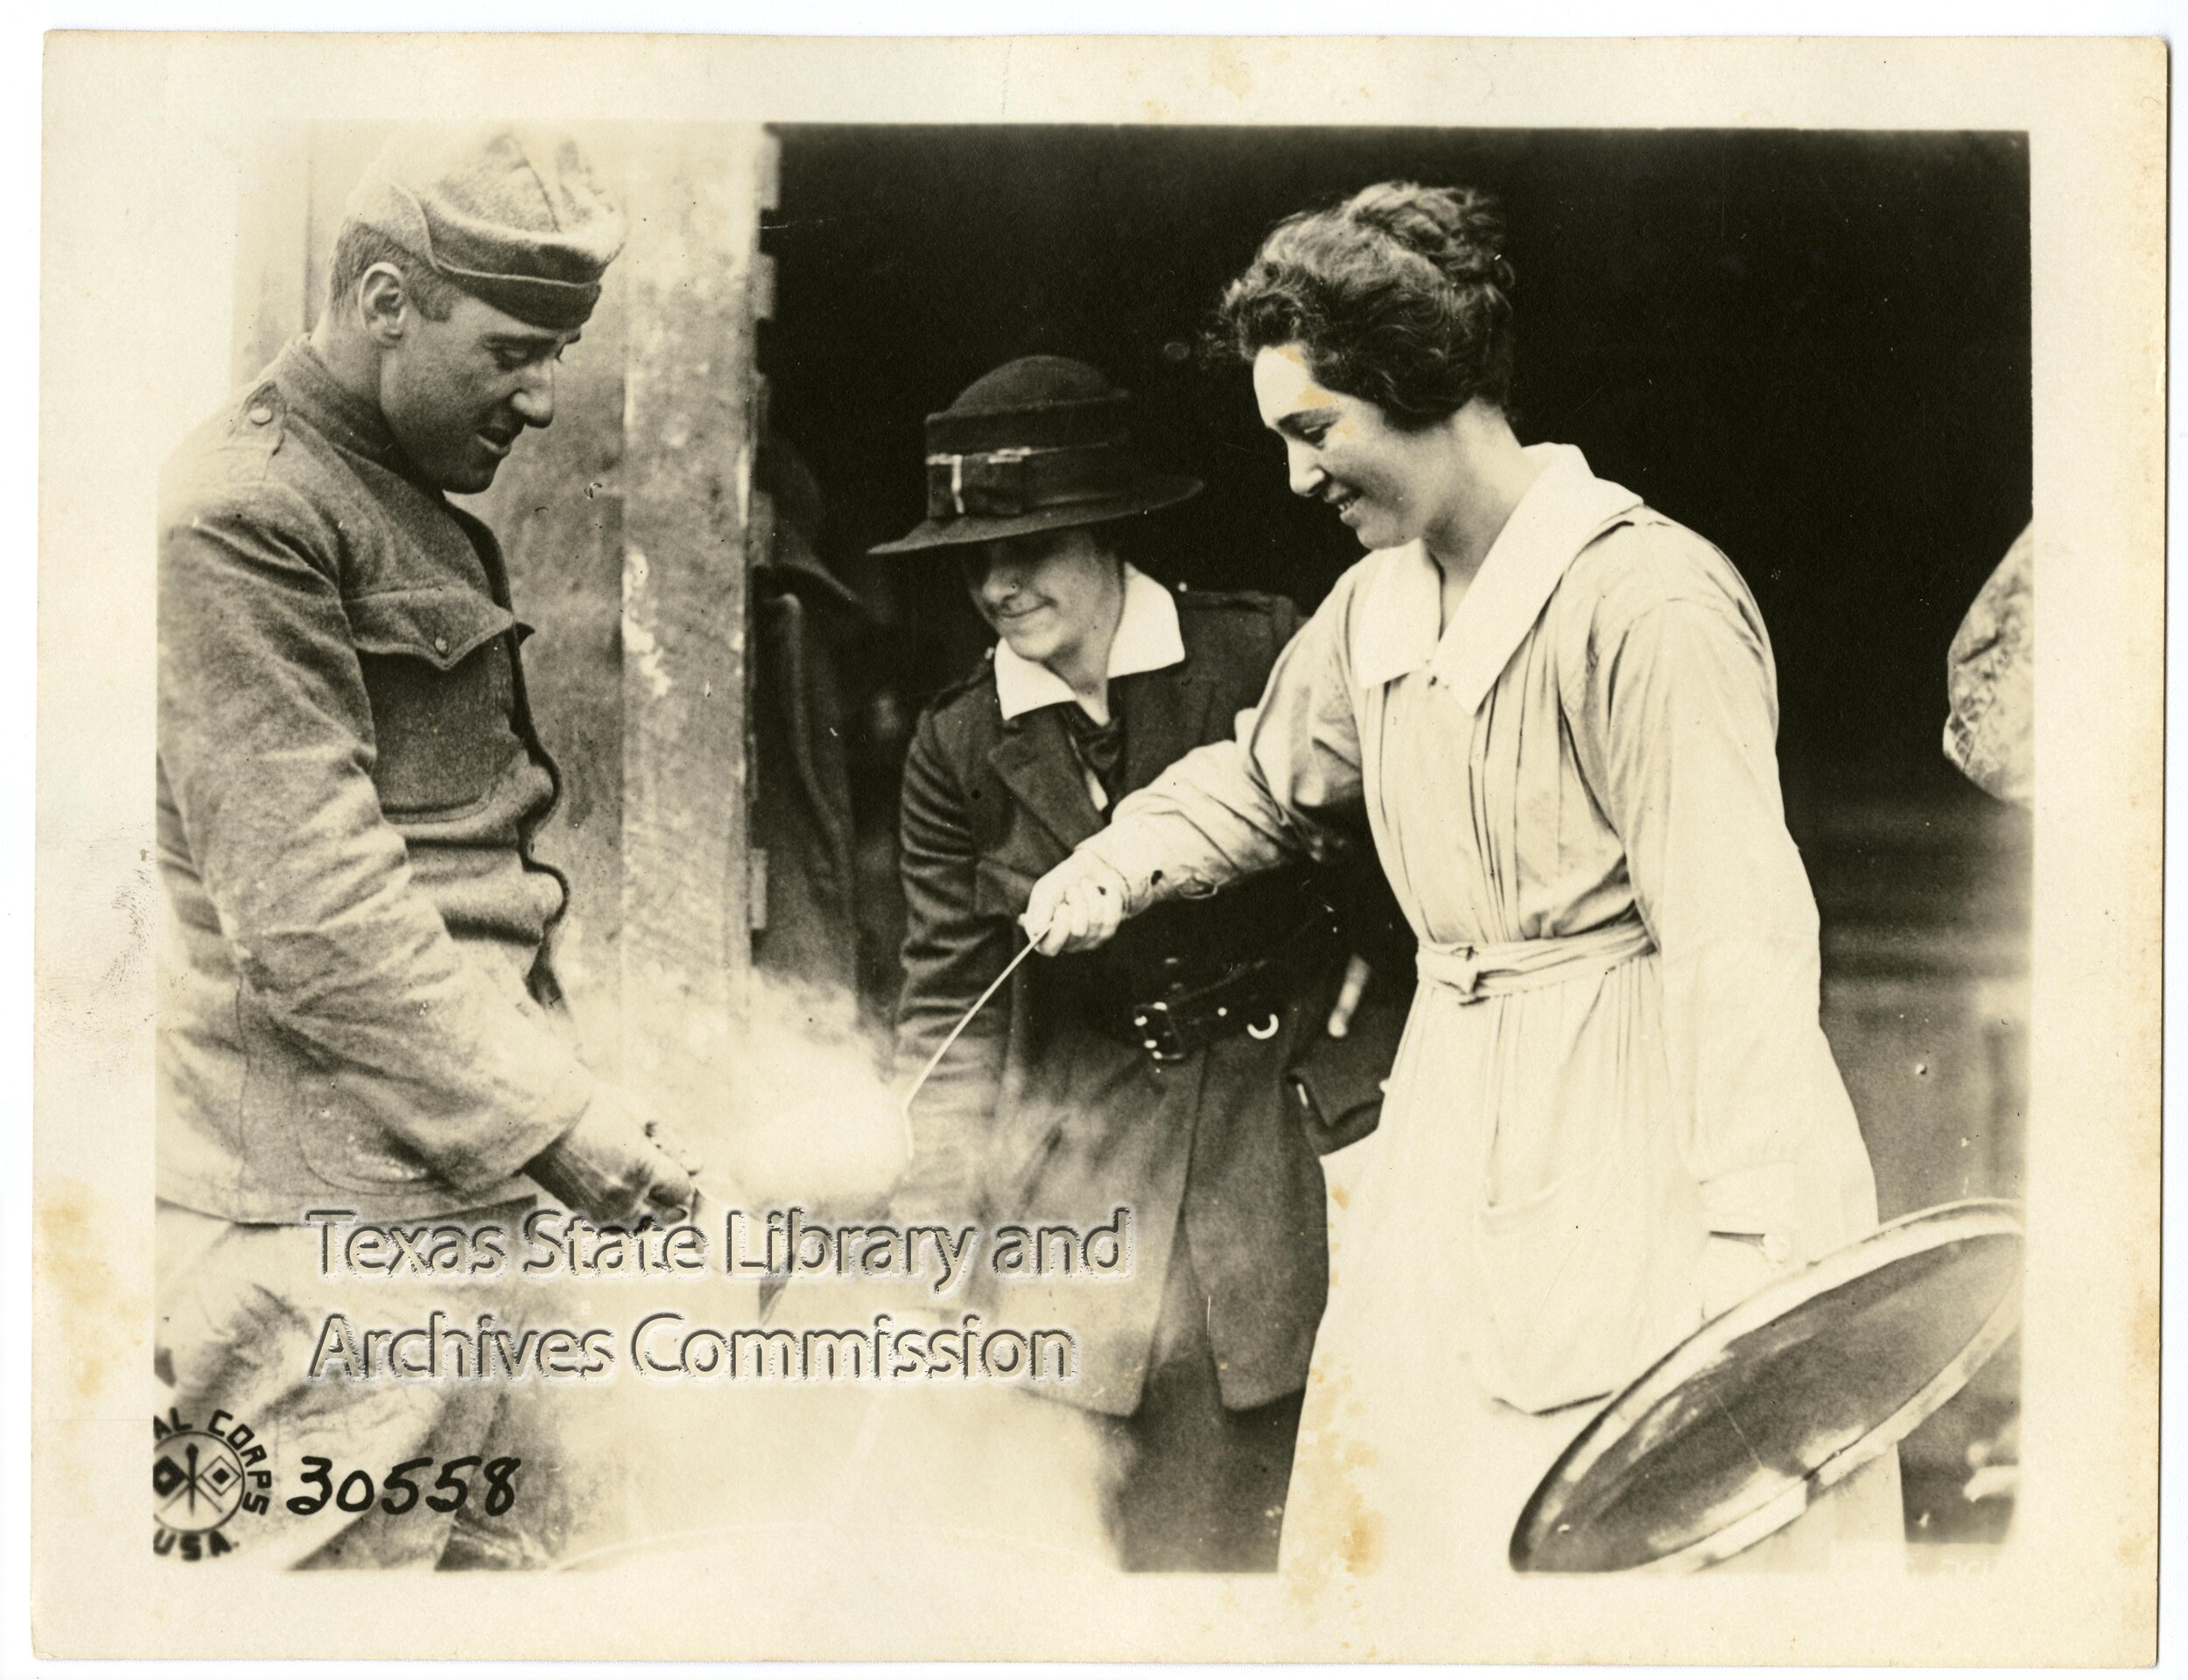  Signal Corps Photo 30558. Miss Adele Birdsall and Miss Thomas, of the American Red Cross, dispensing chocolate to men just in from the line. American Red Cross, Senoncourt, Meuse, France (northeast of Souilly), 1918-10-14, 1972/115-200, Photographs,